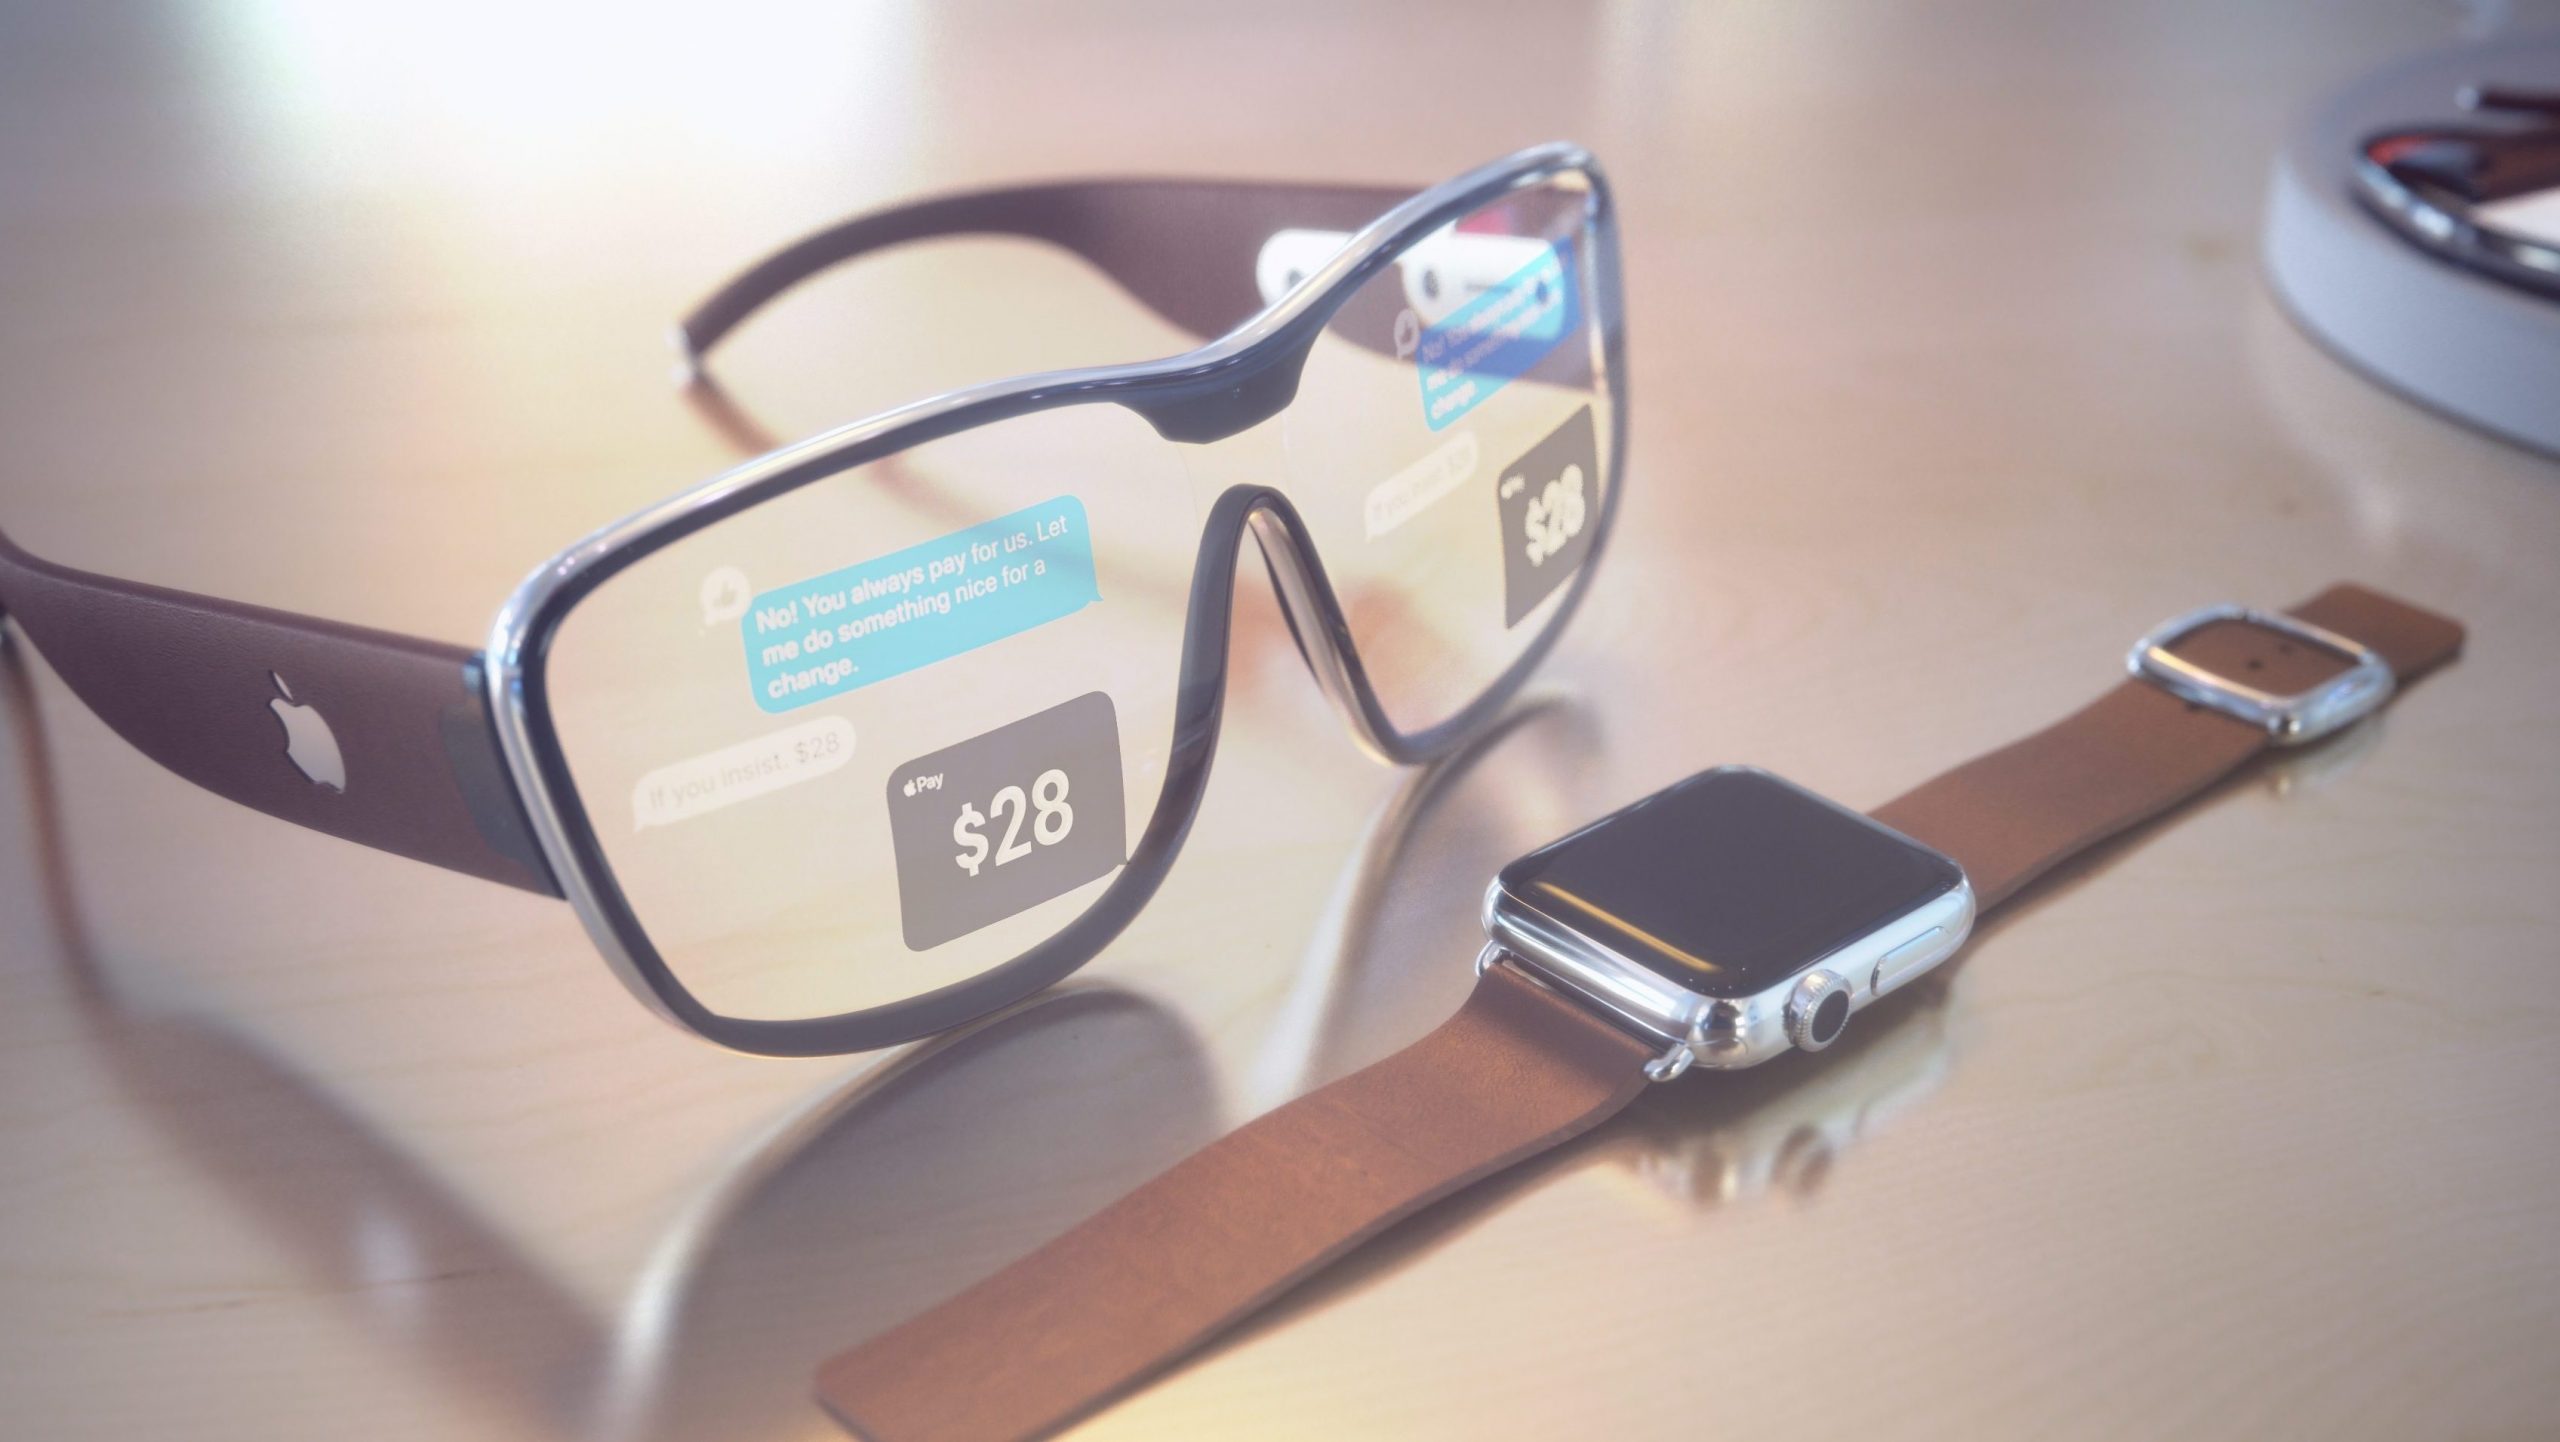 Apple Smart Glasses Updates New Protective Mode to make AR Glasses More Durable e1576699647785 scaled